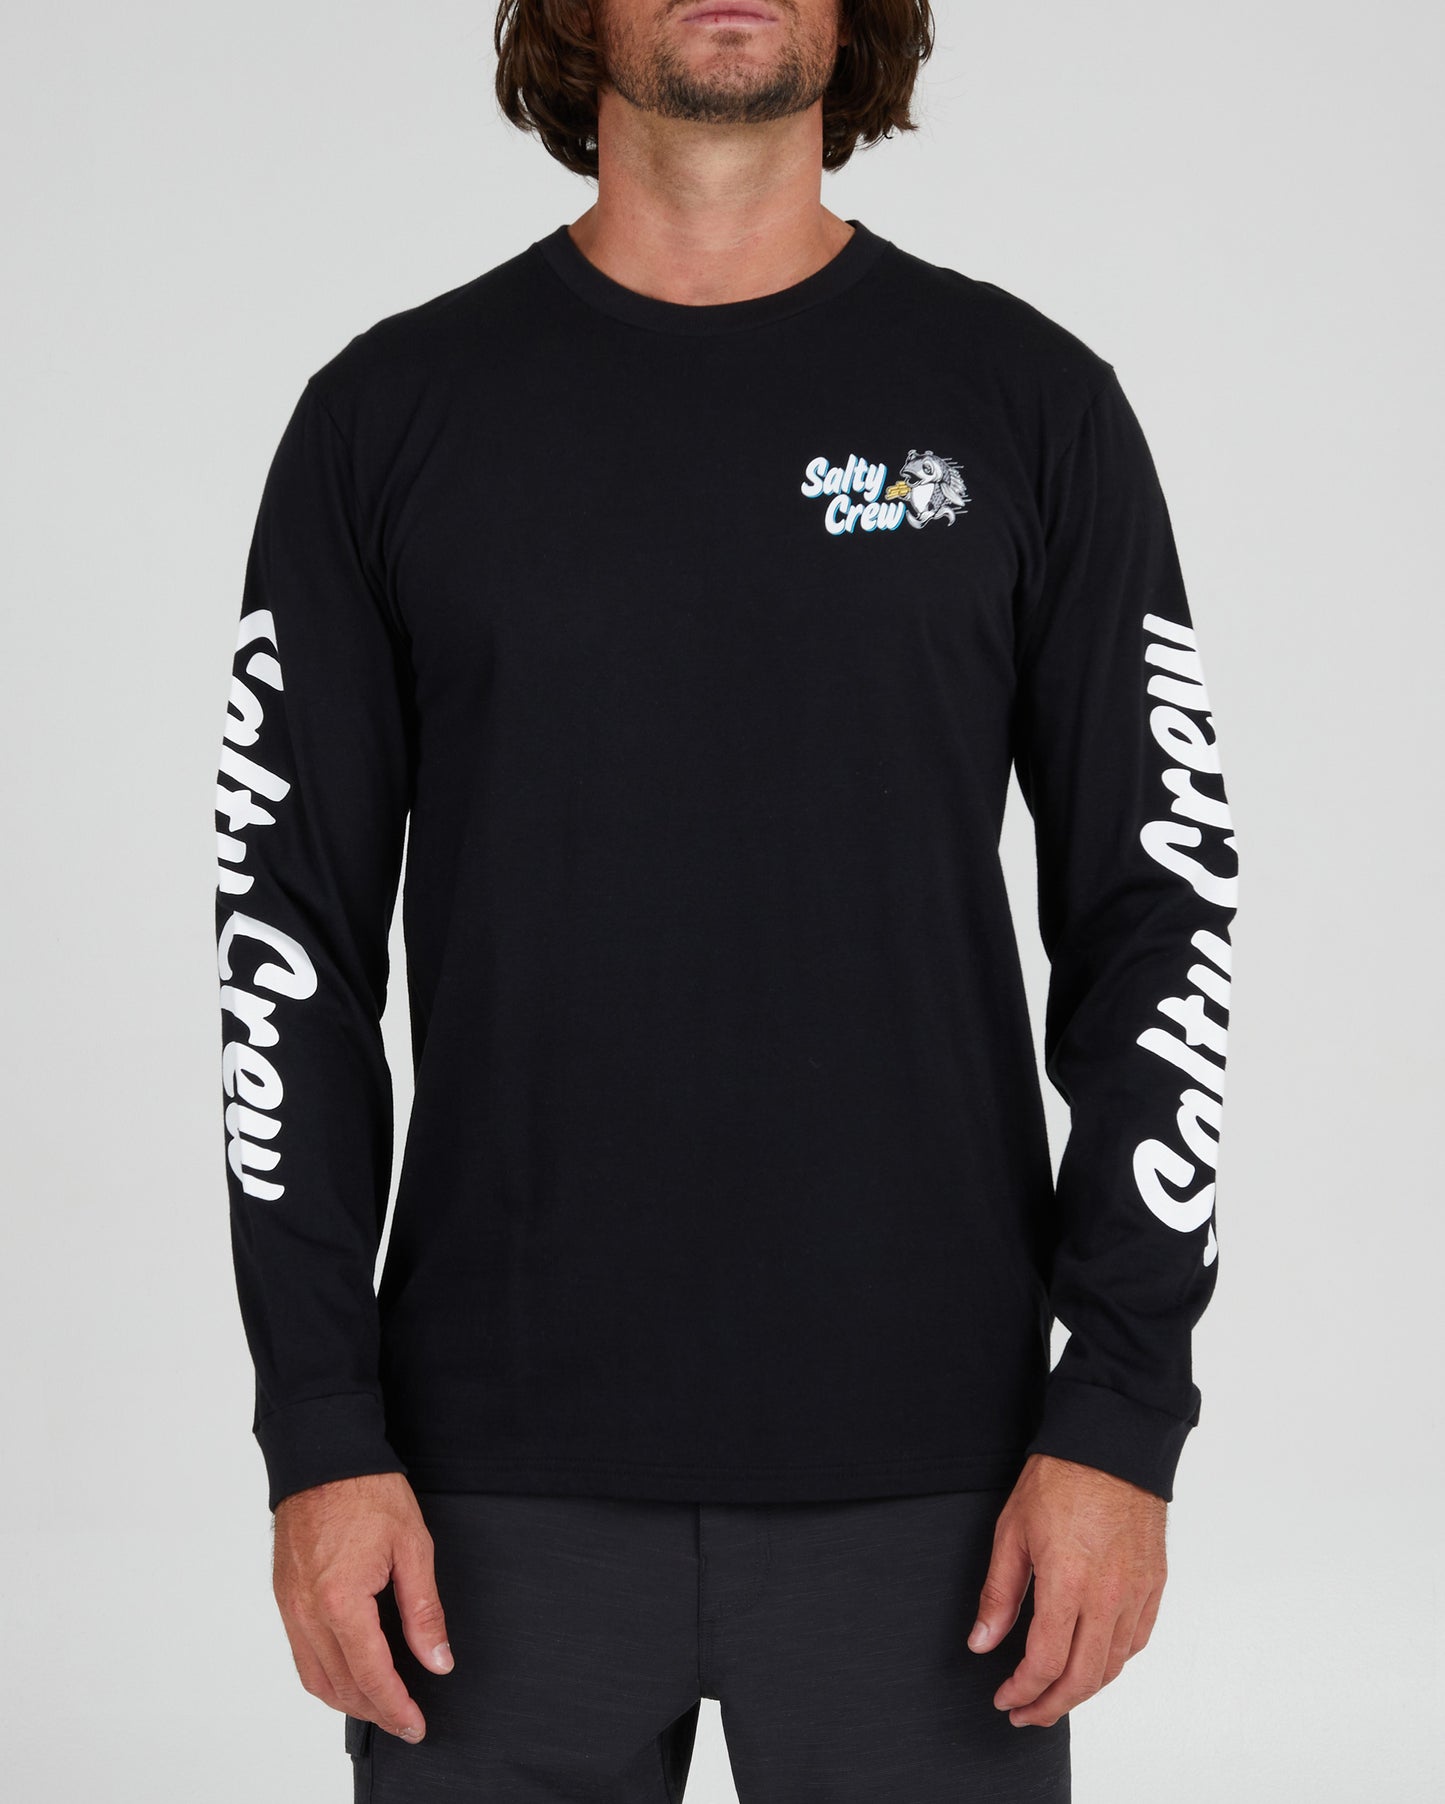 On body front of the Fish and Chips Black L/S Premium Tee